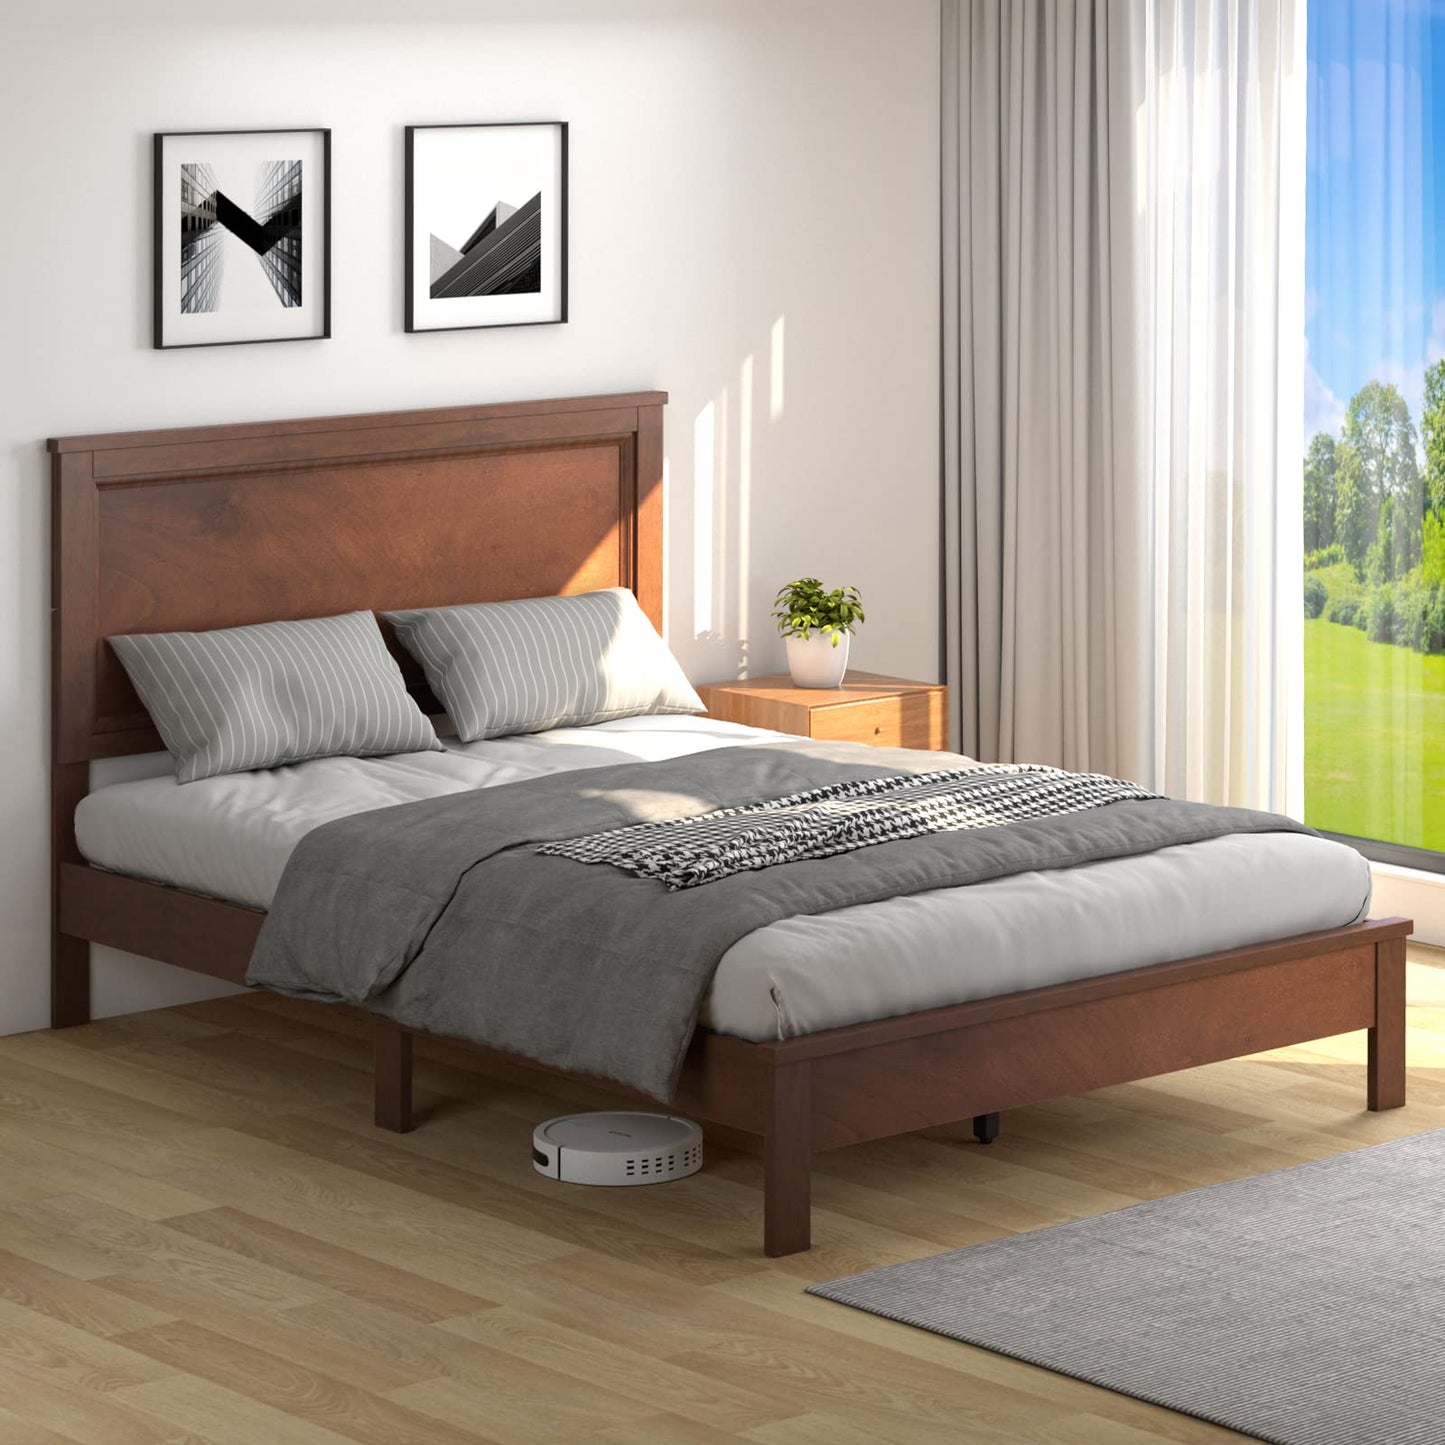 KOMFOTT Wood Full Bed Frame with Headboard, Mid Century Platform Bed with Solid Wood Slats Support & Rubber Wood Legs, Slatted Bed Mattress Foundation, No Box Spring Needed, Easy Assembly